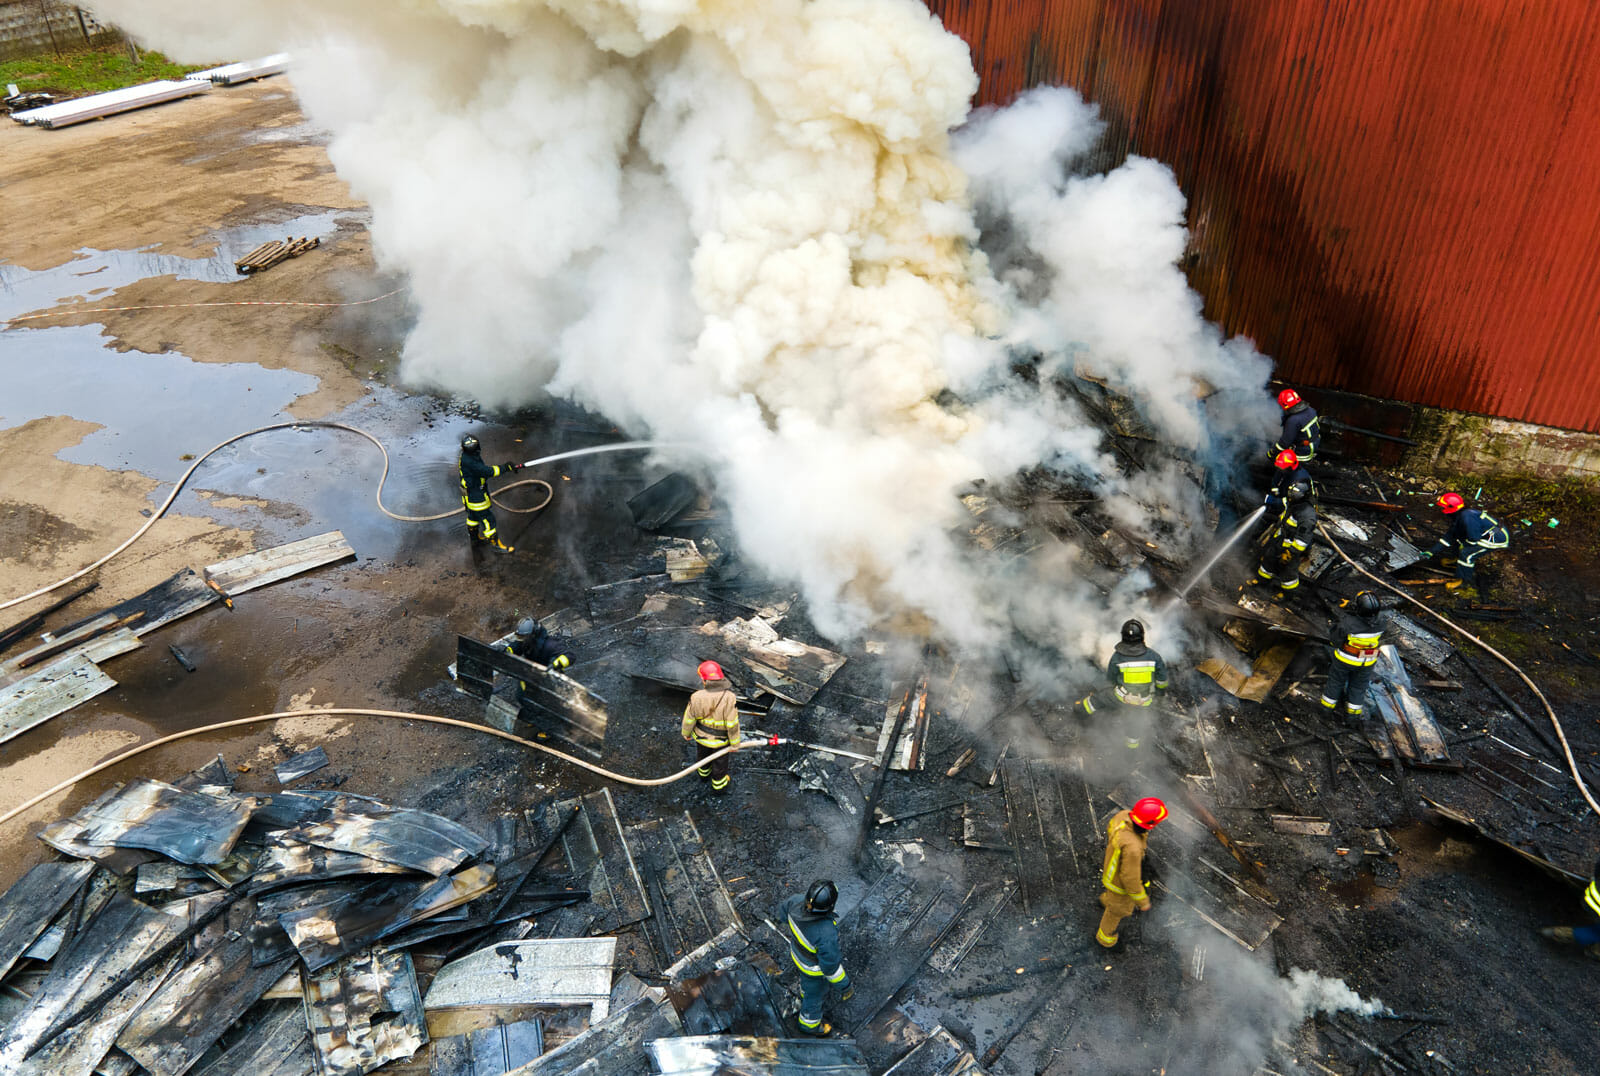 aerial-view-of-firefighters-extinguishing-fire-in-2022-02-09-06-28-17-utc